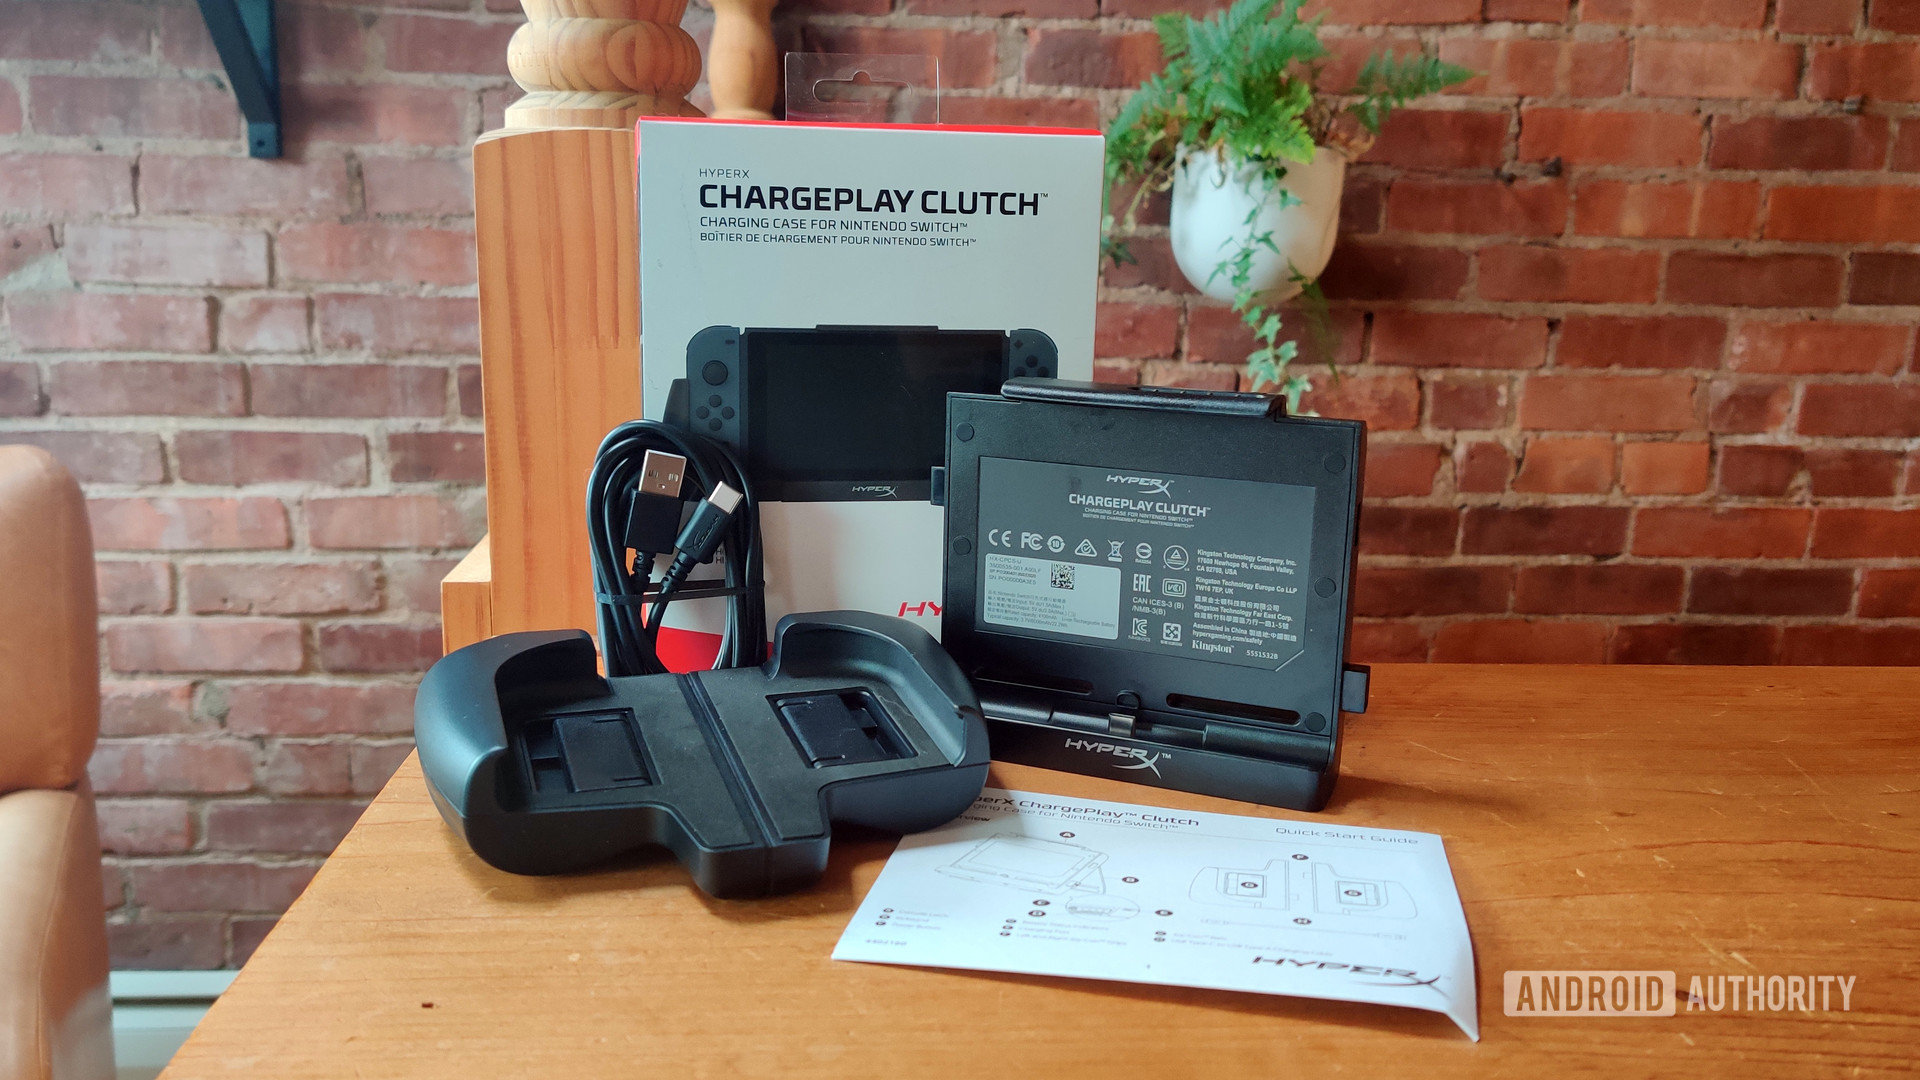 HyperX Chargeplay Clutch Review Box Contents